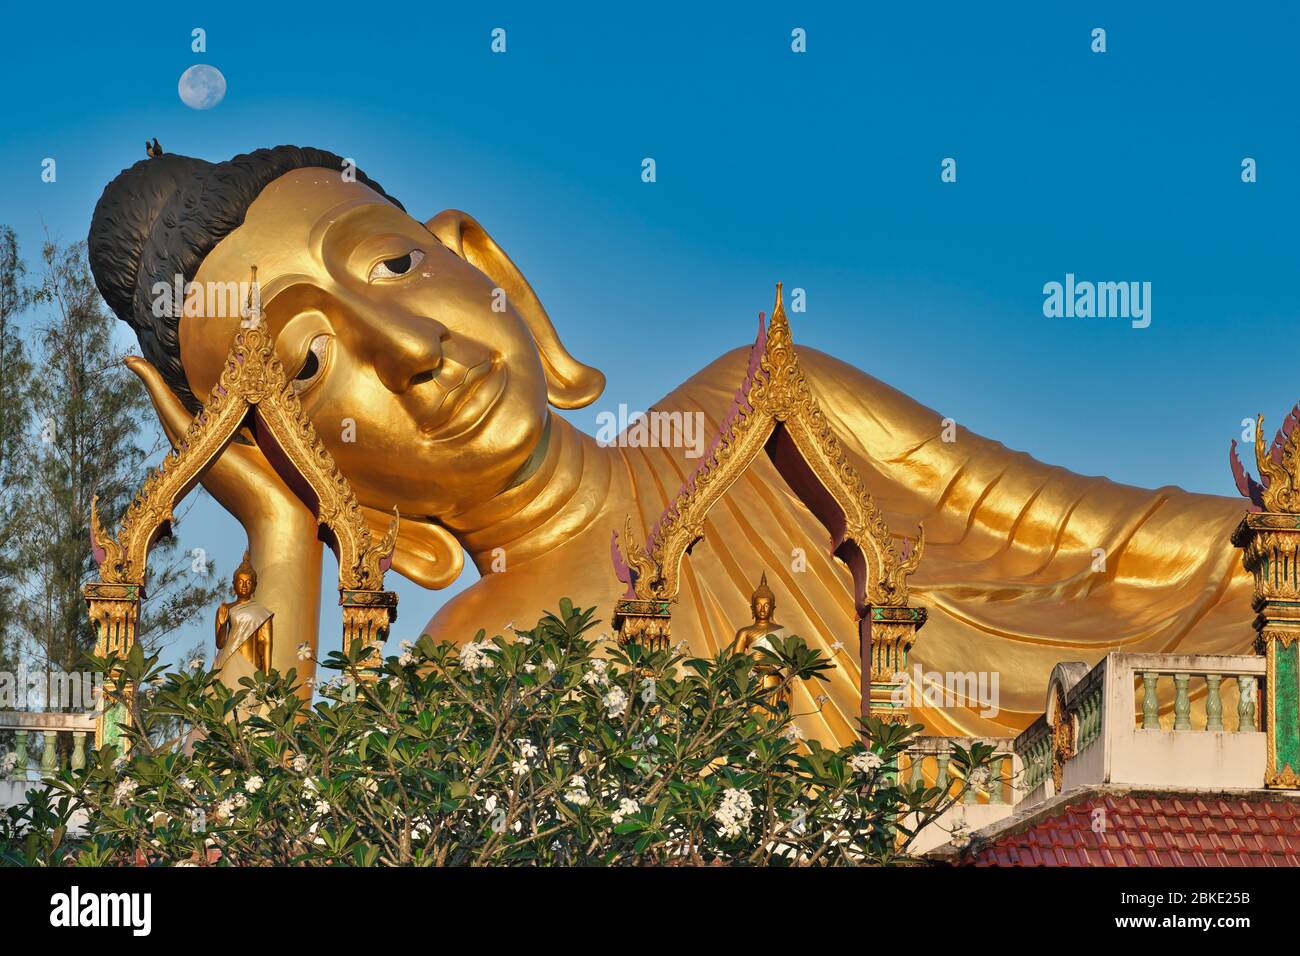 On an early morning, the full moon is seen over the head of the 29 m long so-called 'sleeping' Buddha of Wat Si Sunthorn in Thalang, Phuket, Thailand Stock Photo